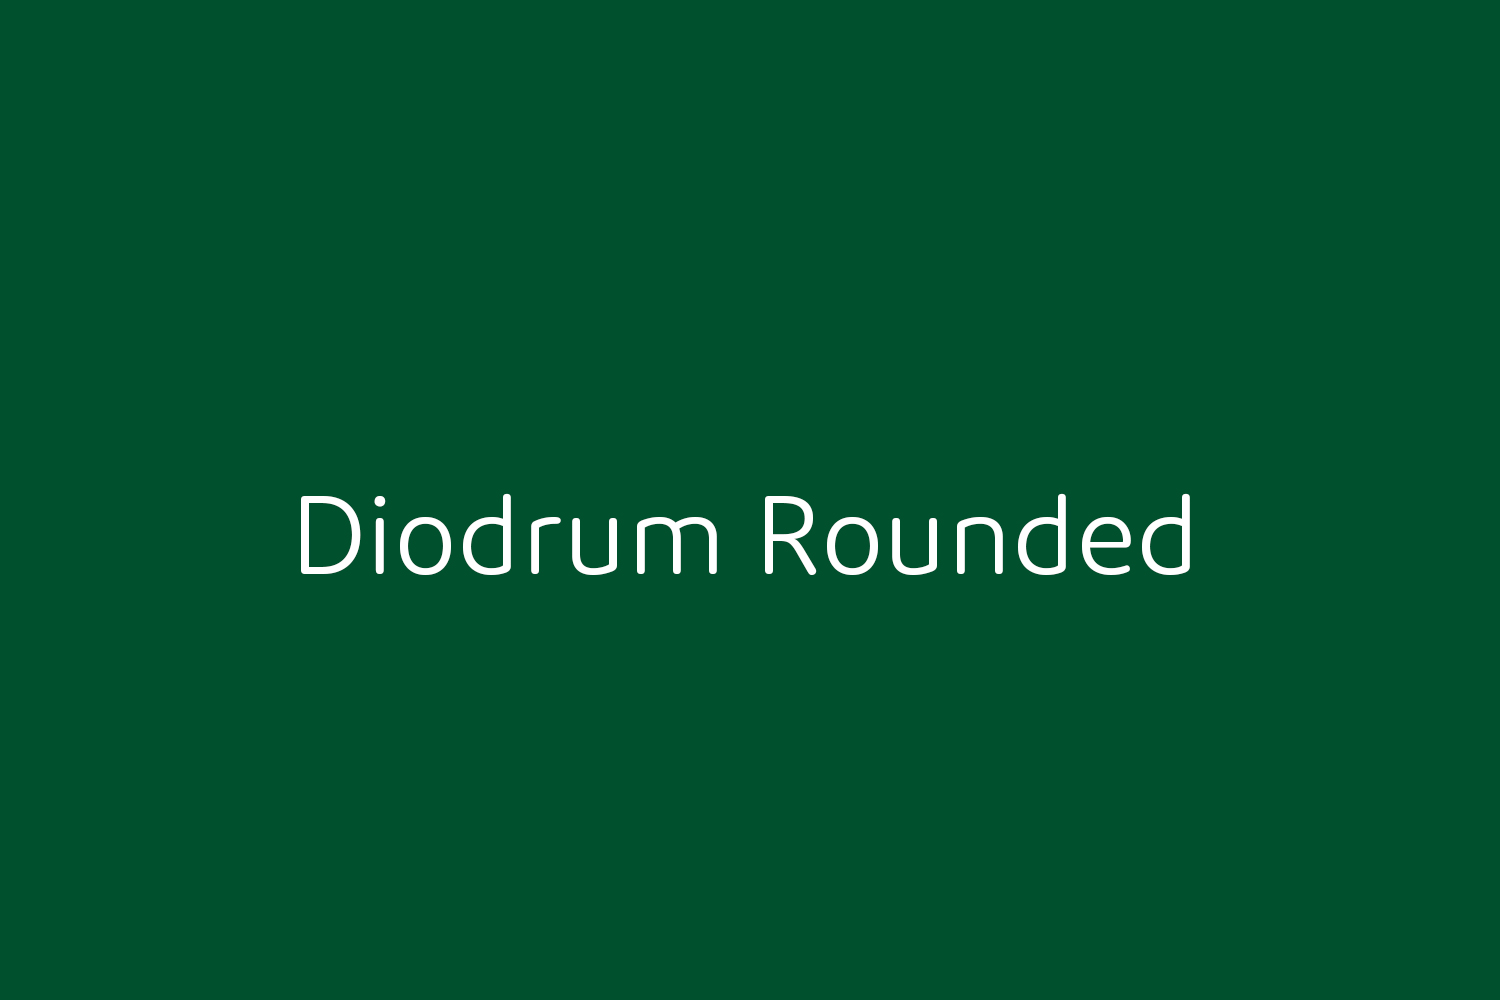 Diodrum Rounded